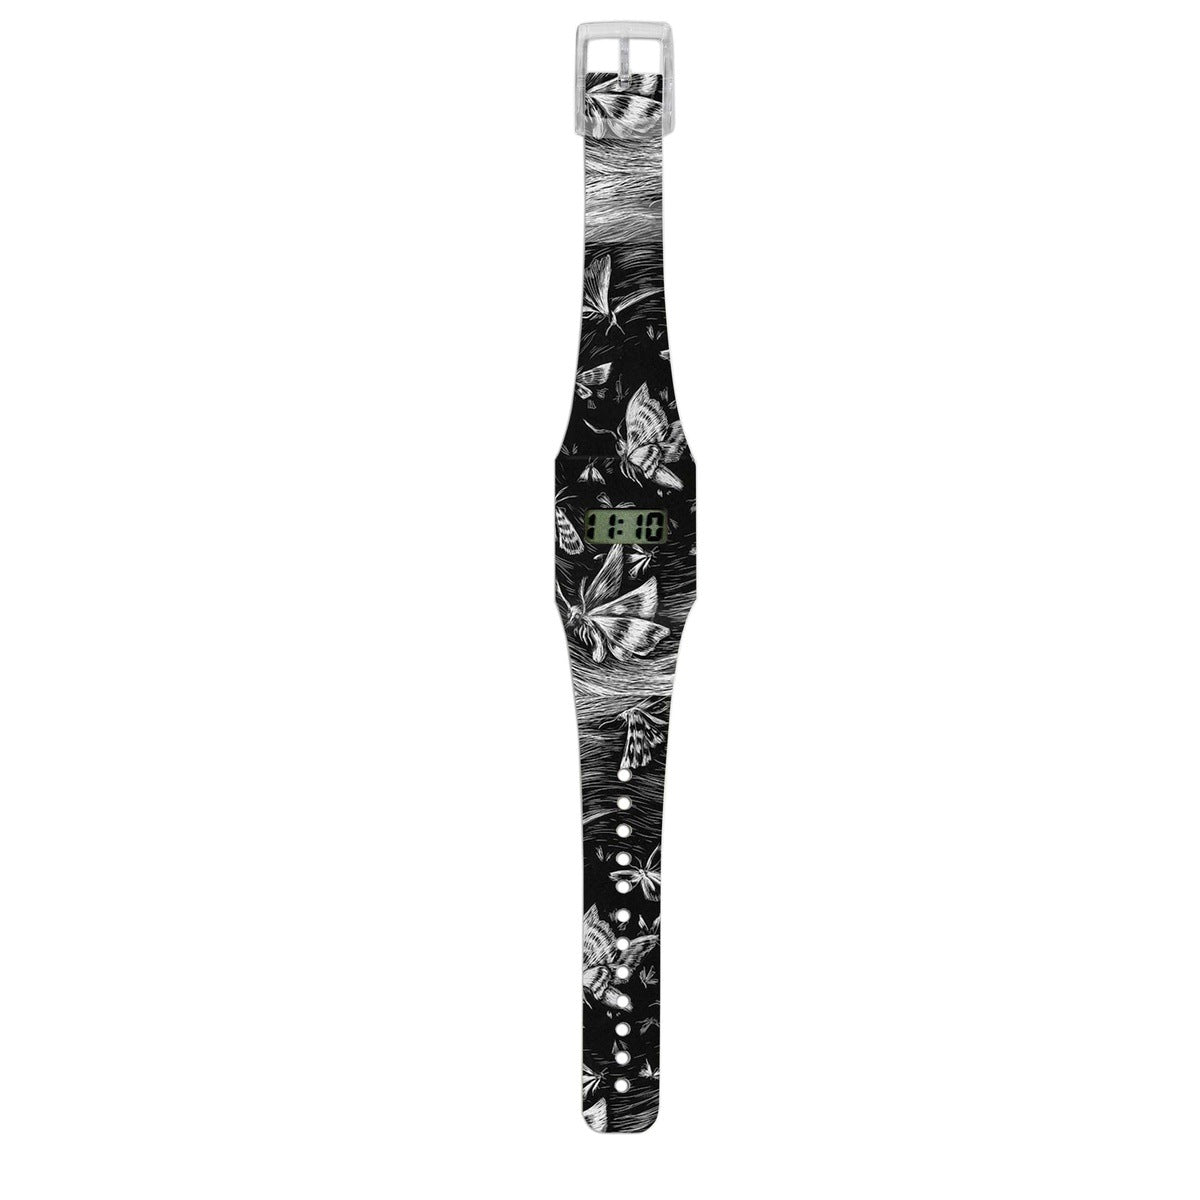 Paperwatch Armbanduhr - Butterfly Effect I like paper